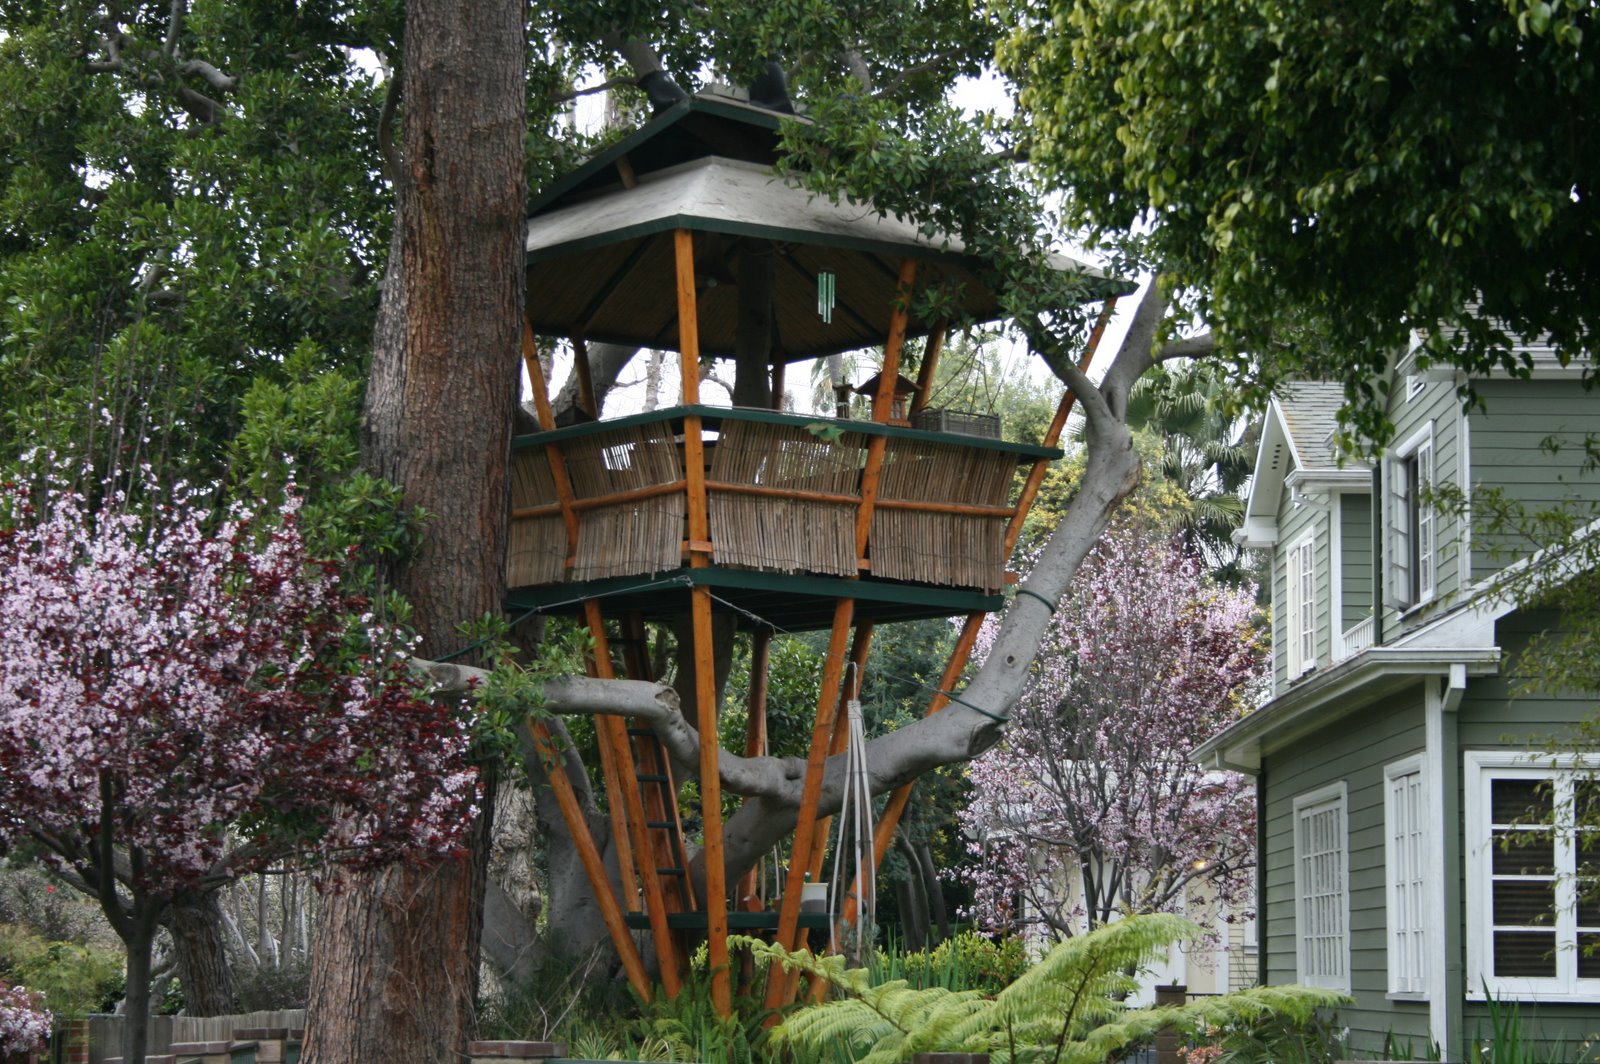 tree house pics tree house images tree house pics tree houses pictures ...